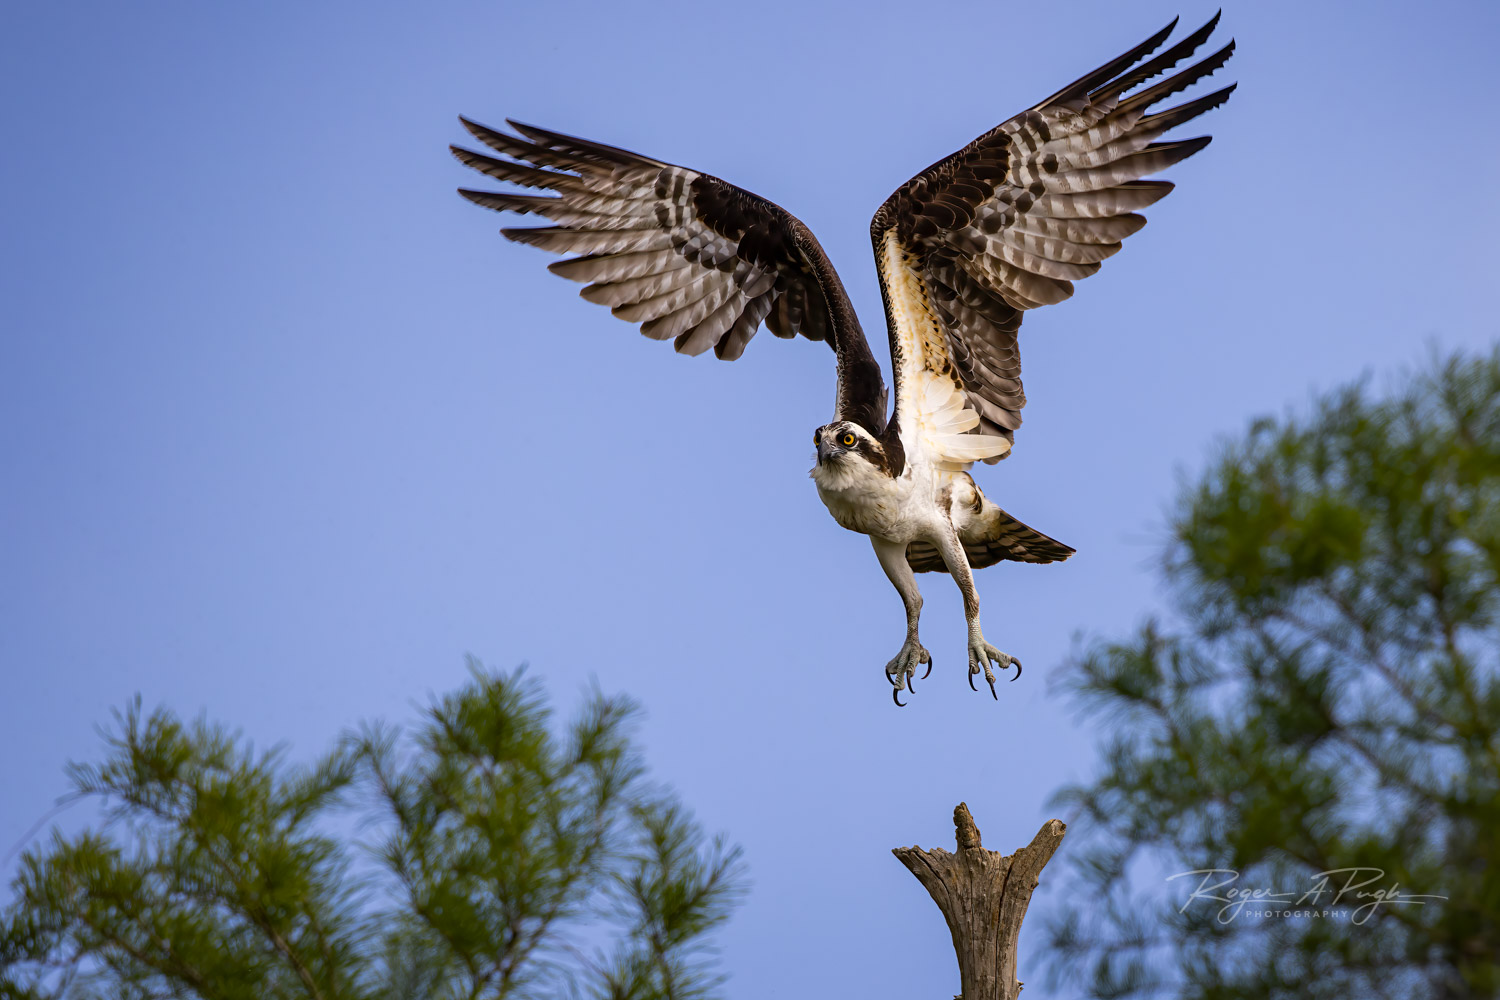 The osprey is a tenacious bird. Not one that I would like to mess with.